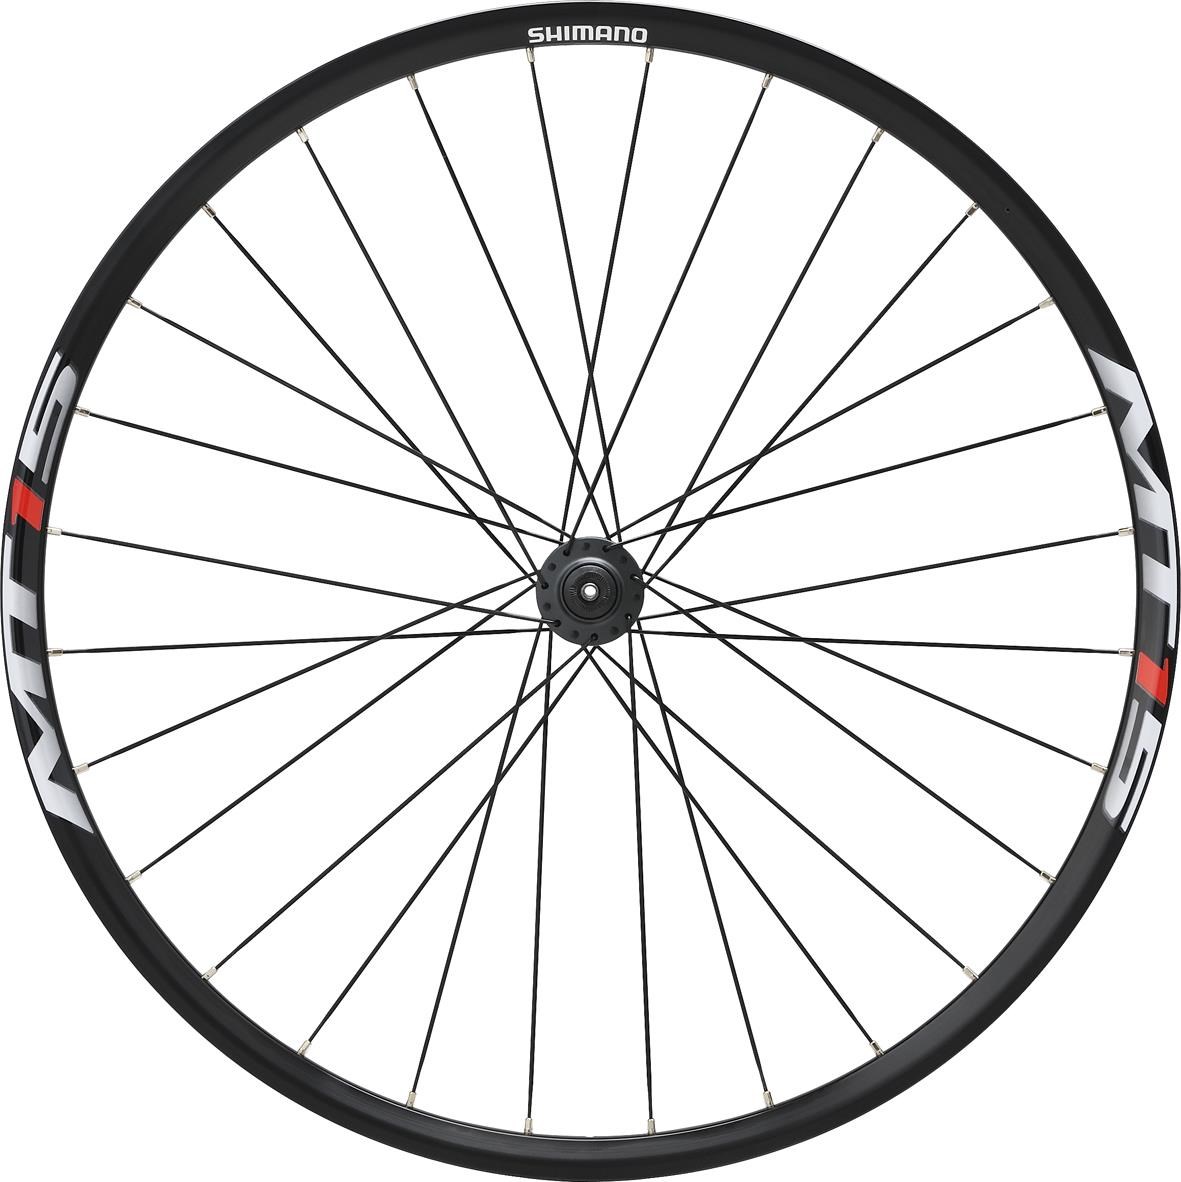 Shimano WH-MT15 29" MTB Front Wheel product image